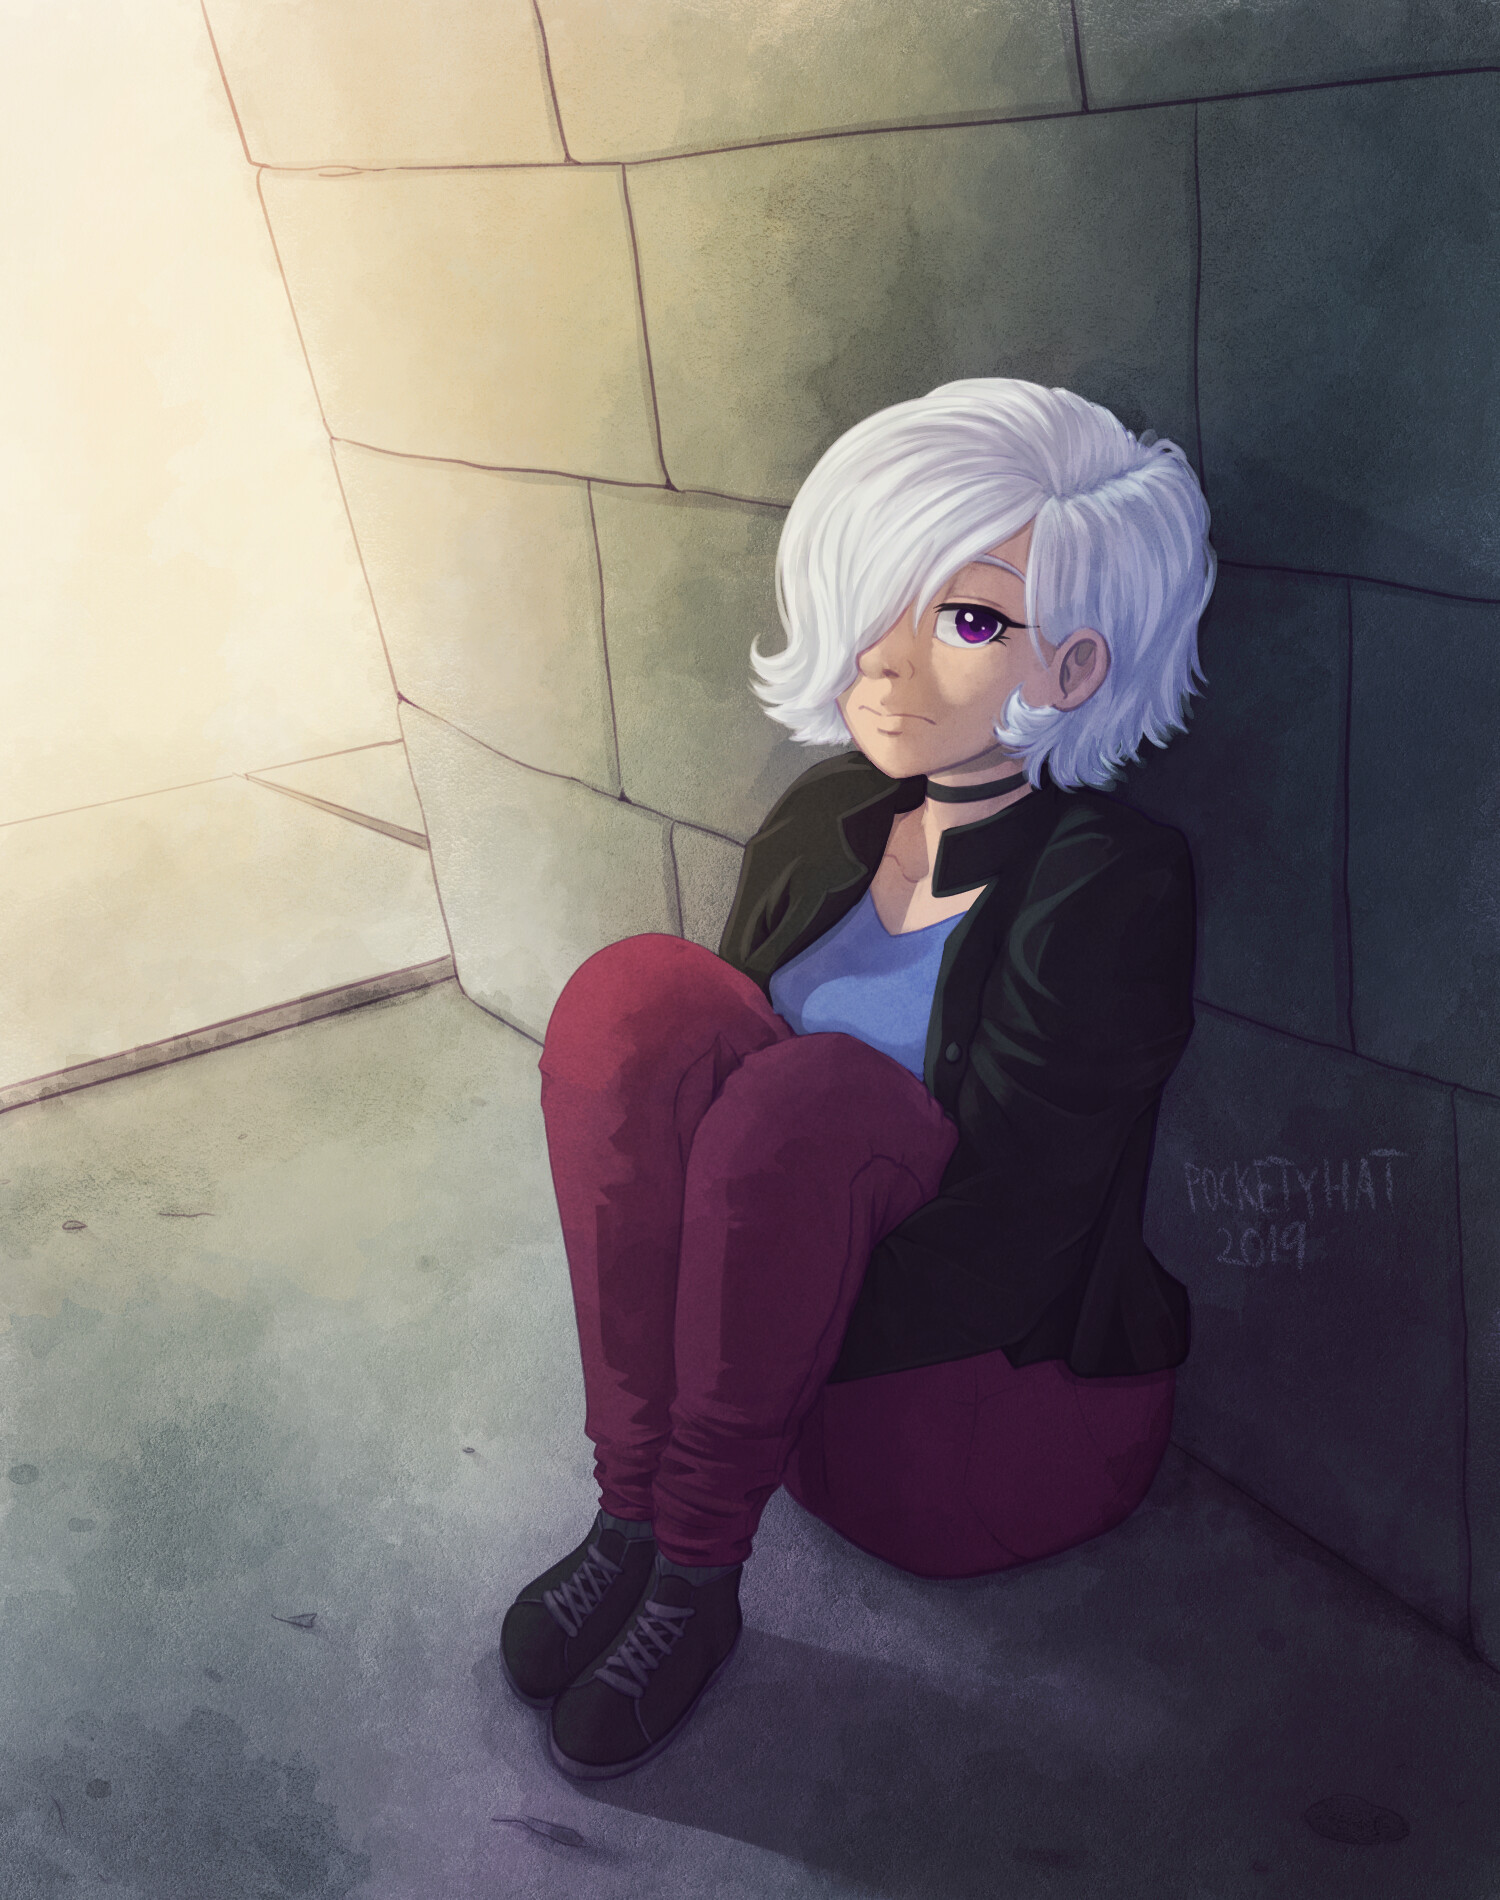 Amana sitting in an alley, character belongs to Pennoink, 2019